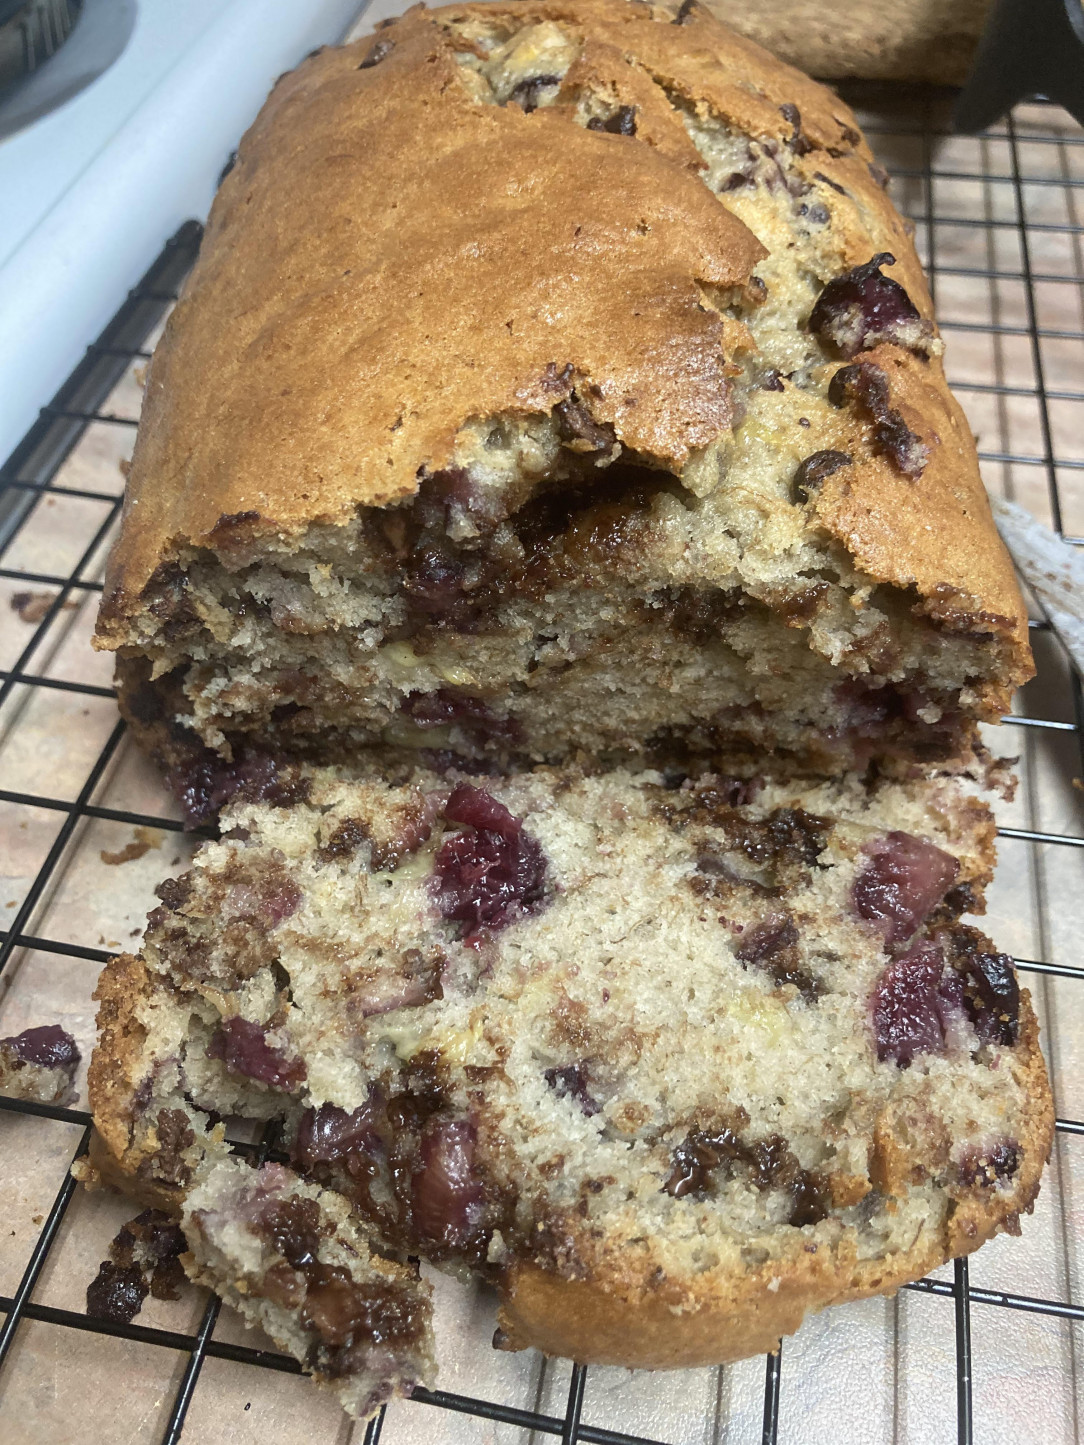 Chocolate Cherry Banana Bread made with fresh ripe bananas and cherries! Can’t believe I never tried this before!